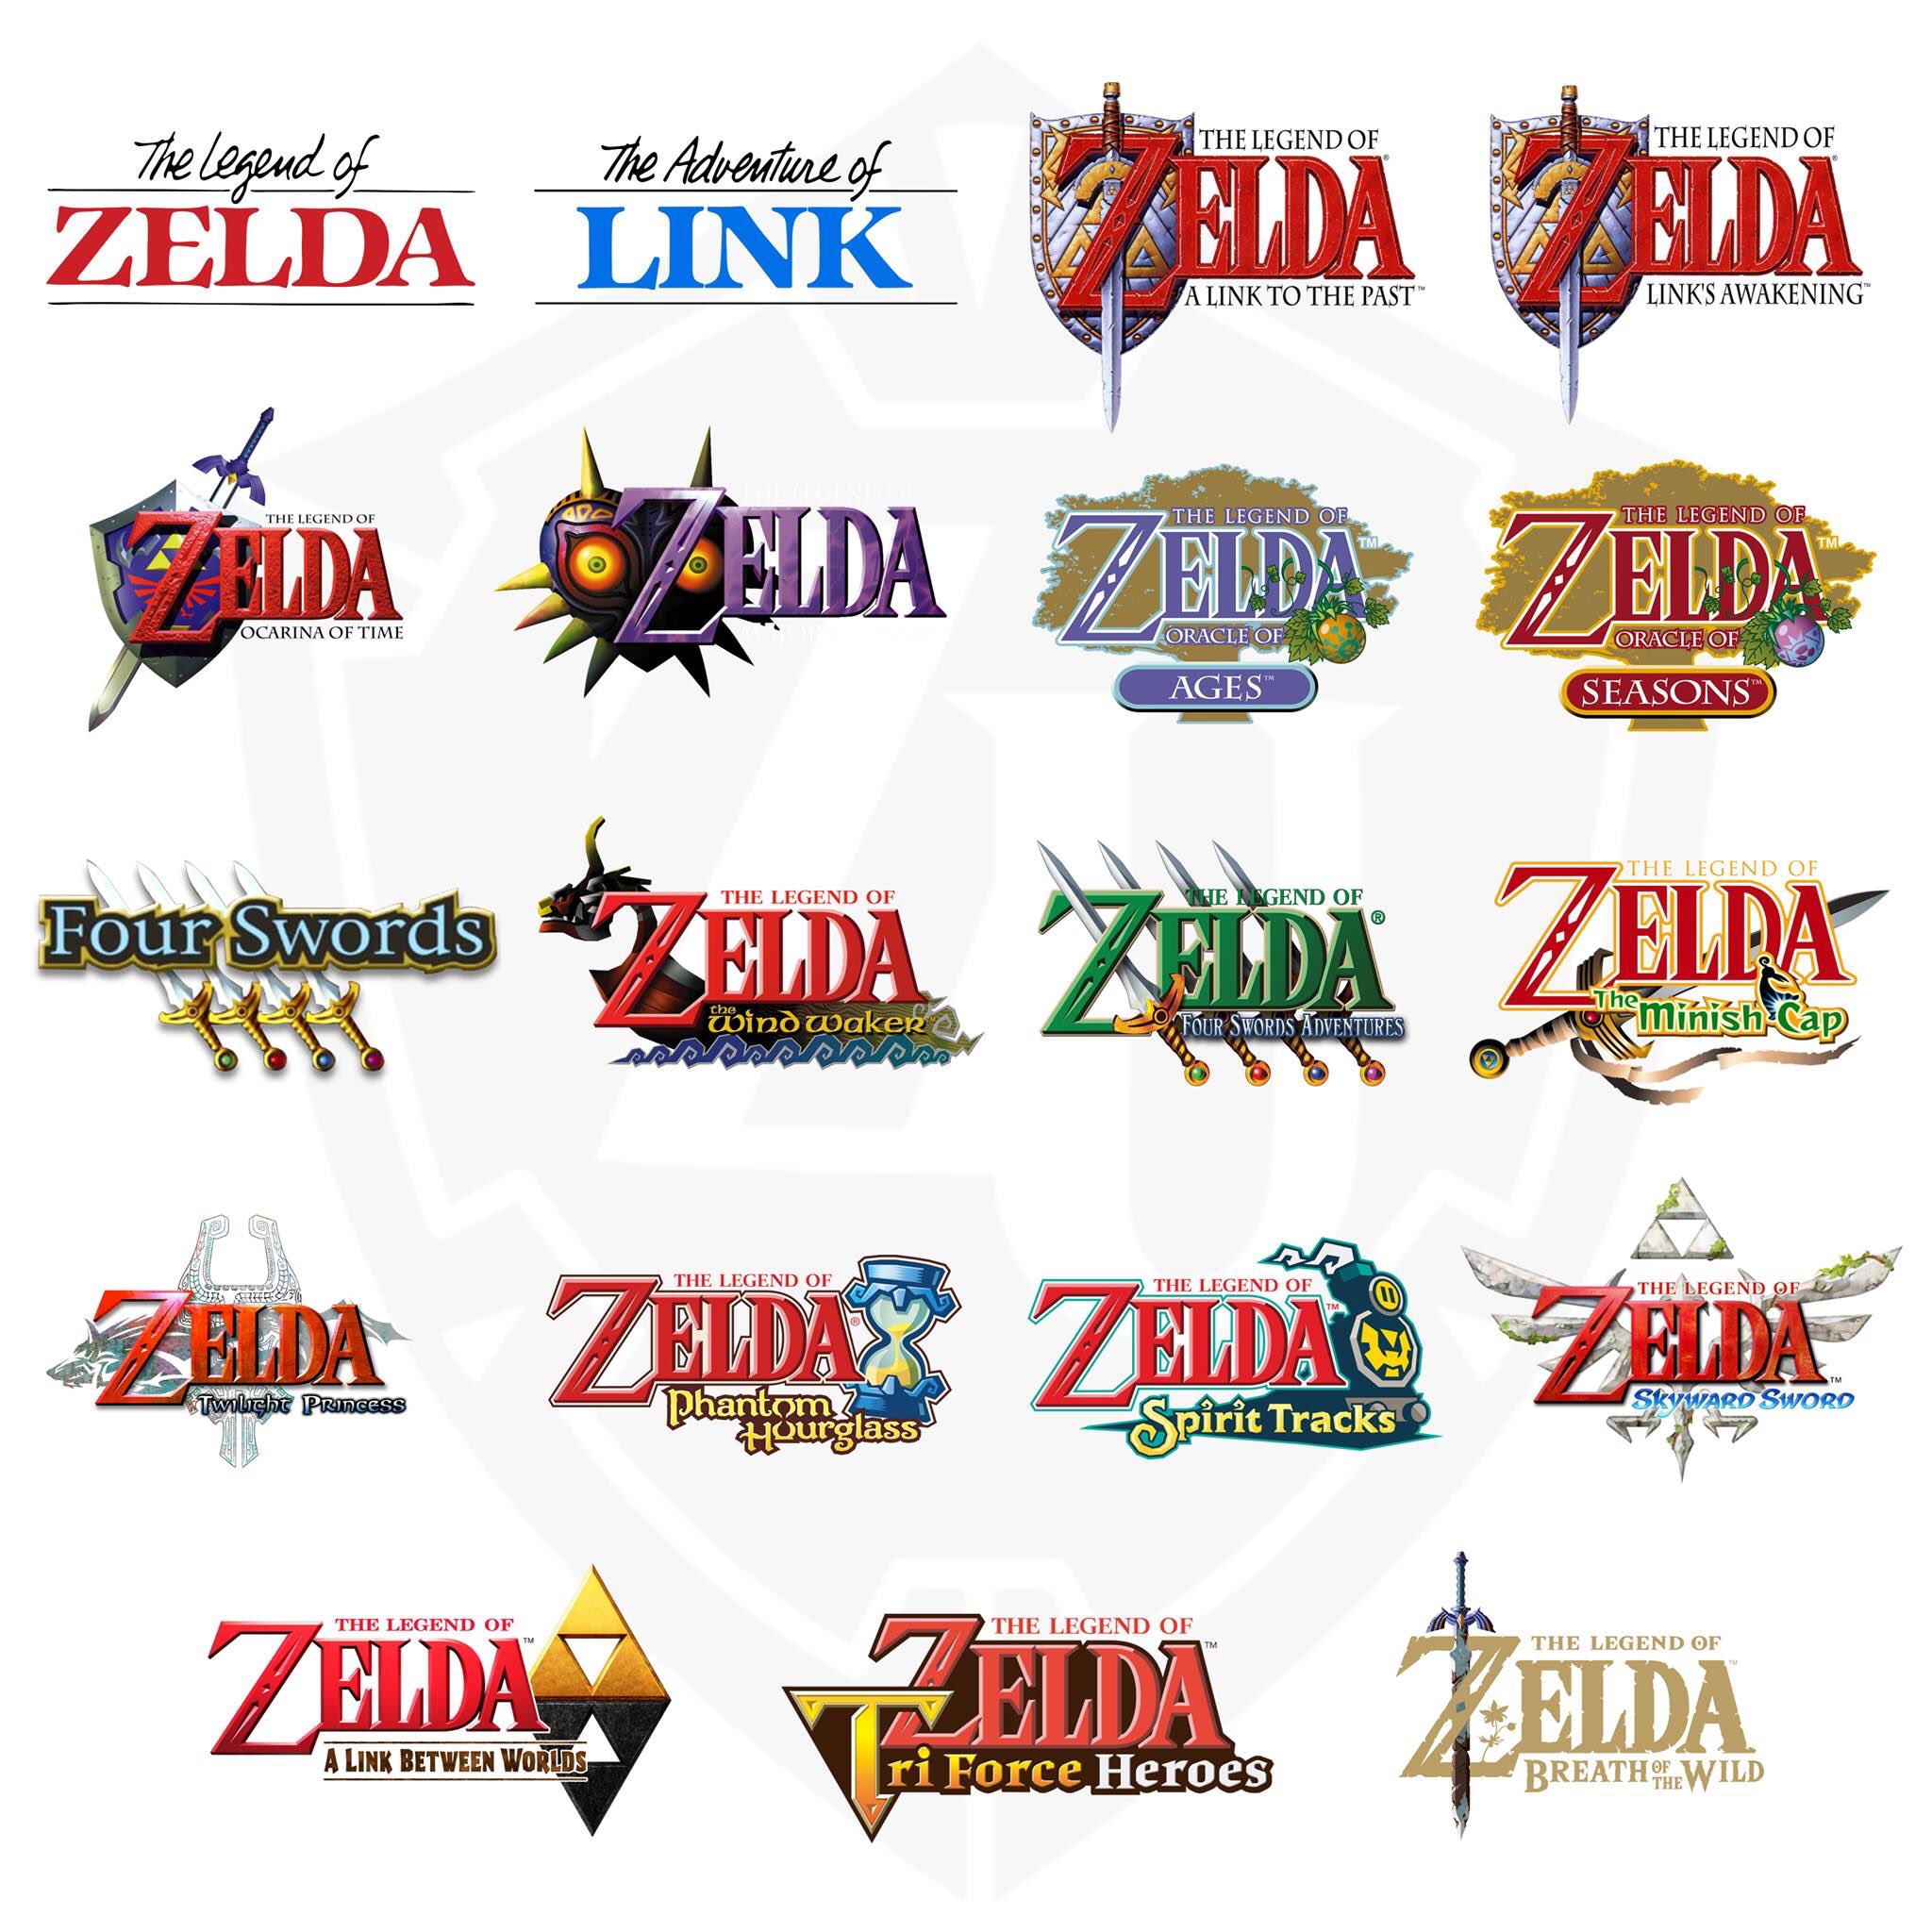 Zelda Universe on Twitter: "List off of The Legend of games you currently own right now. (Bonus points if you share your collection!) https://t.co/uOcMUVZ6m0" / Twitter